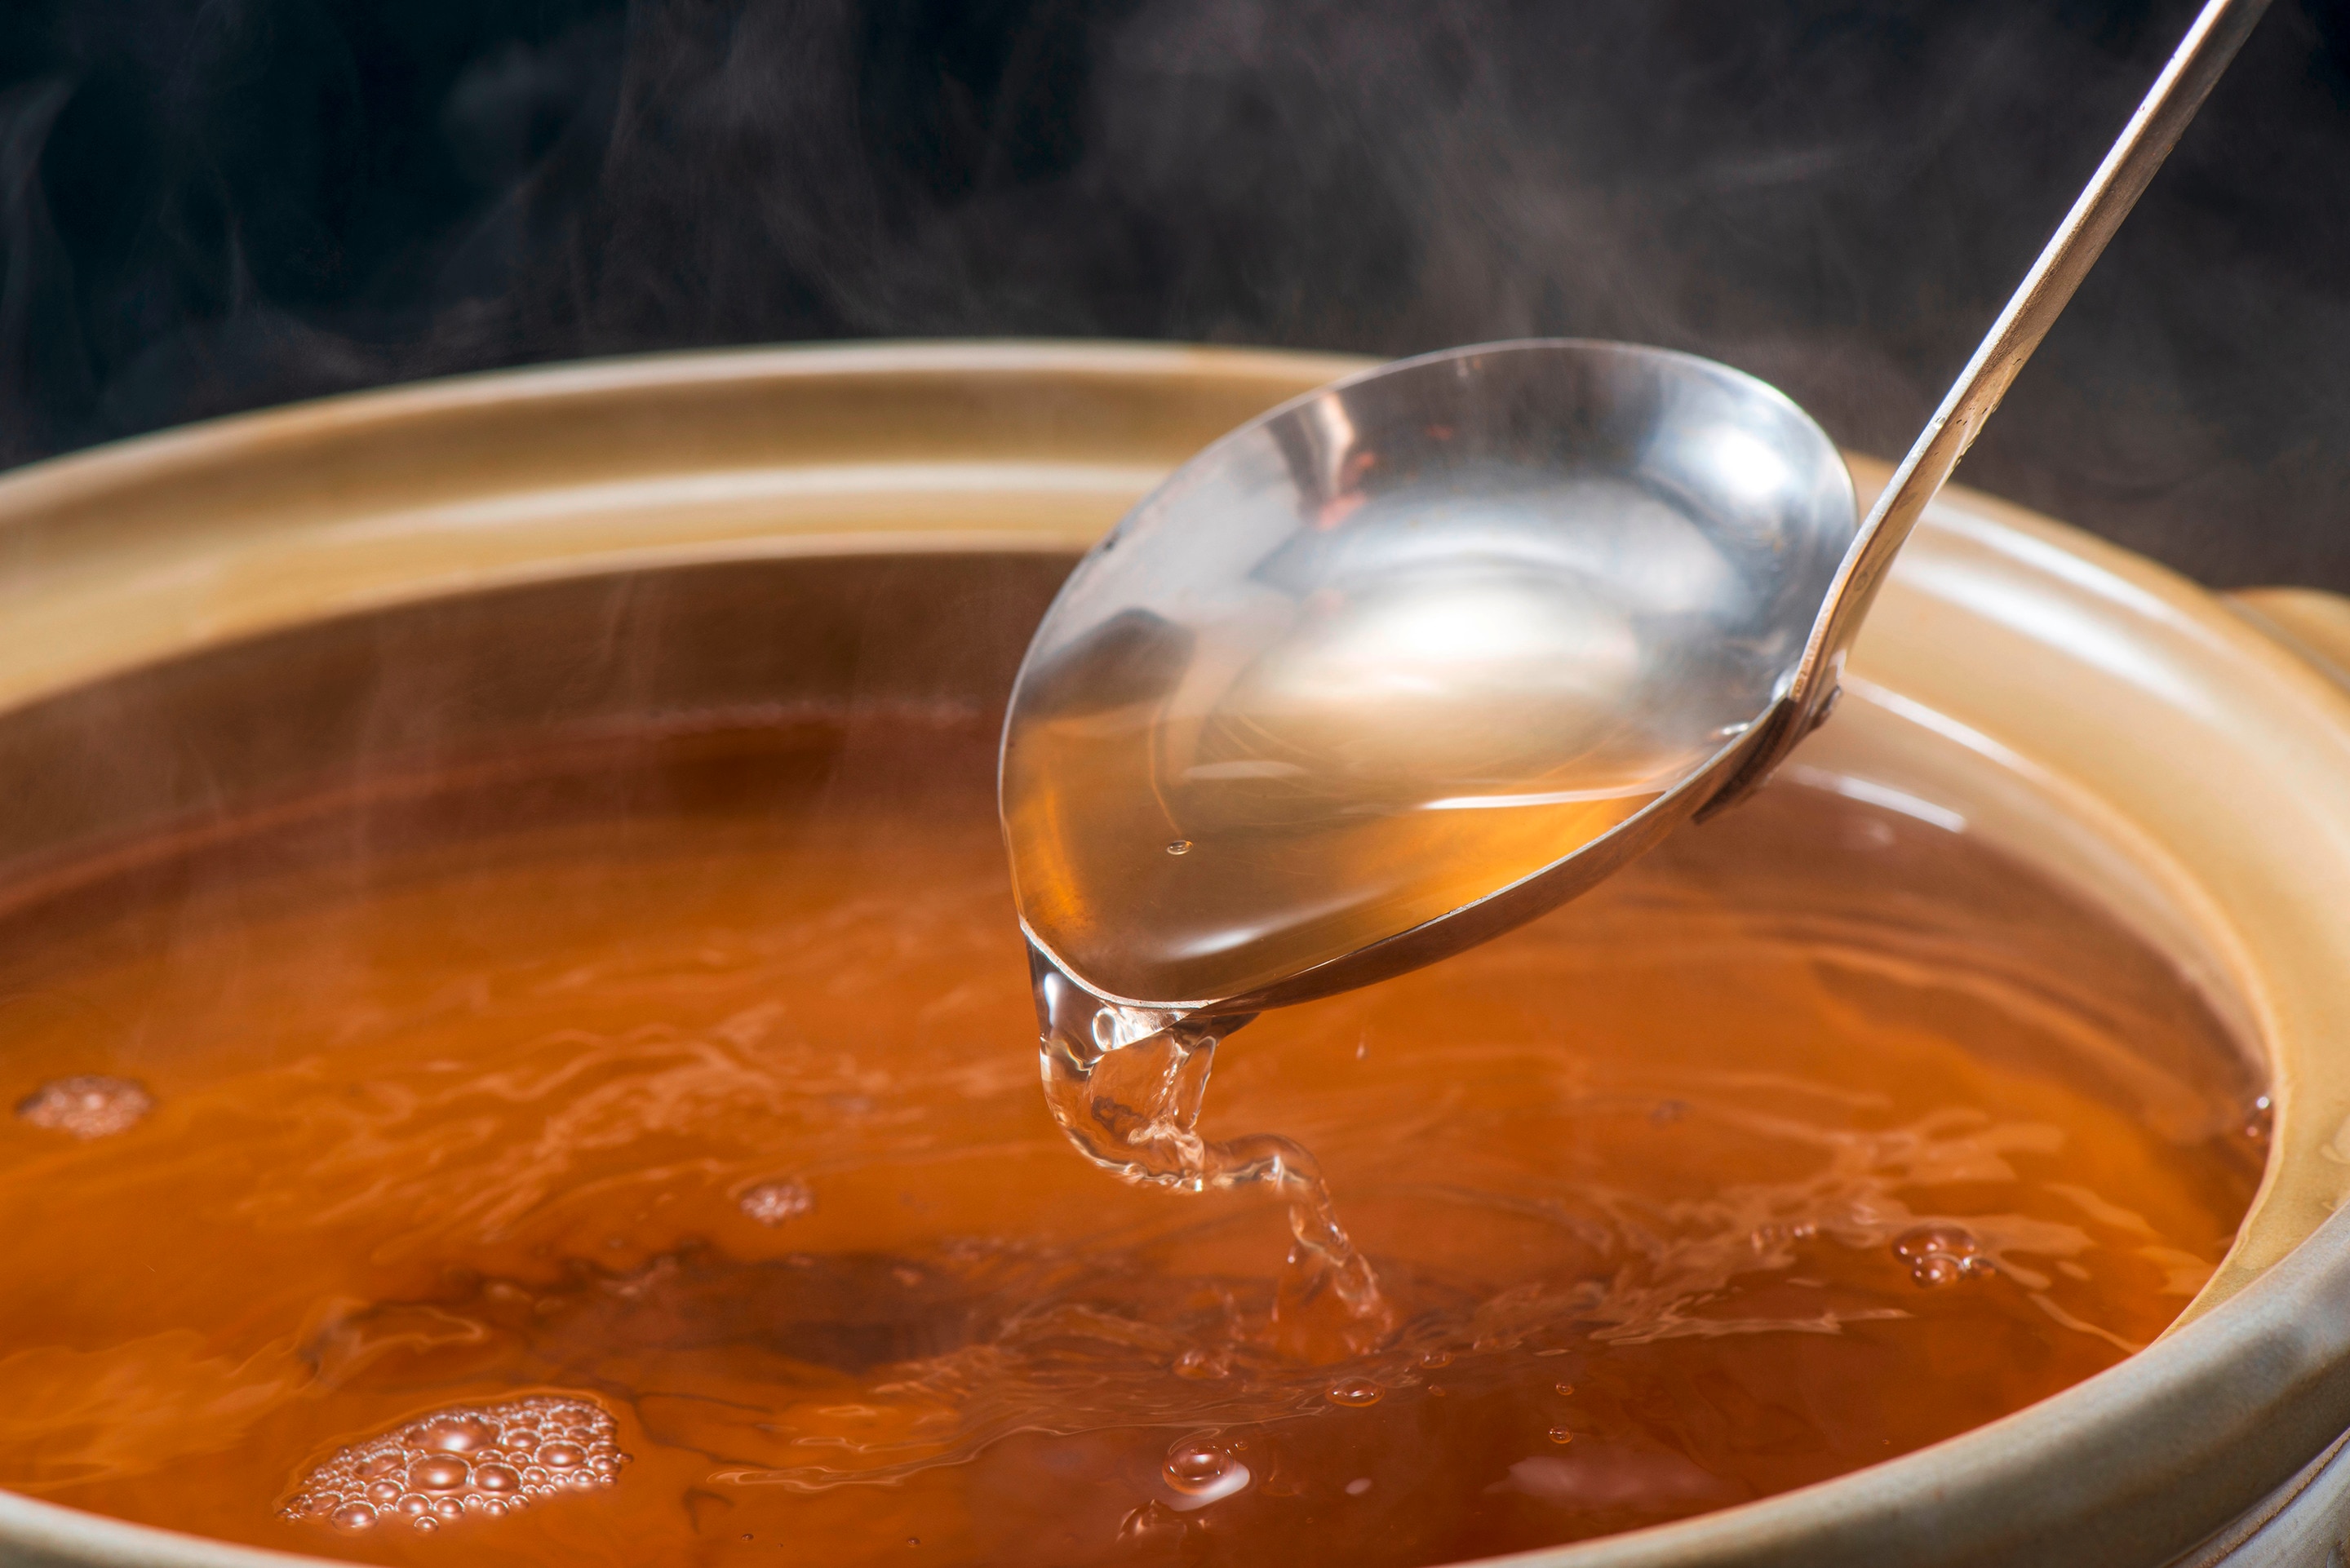 A pot filled with hot fish soup with a metal ladle scooping a portion